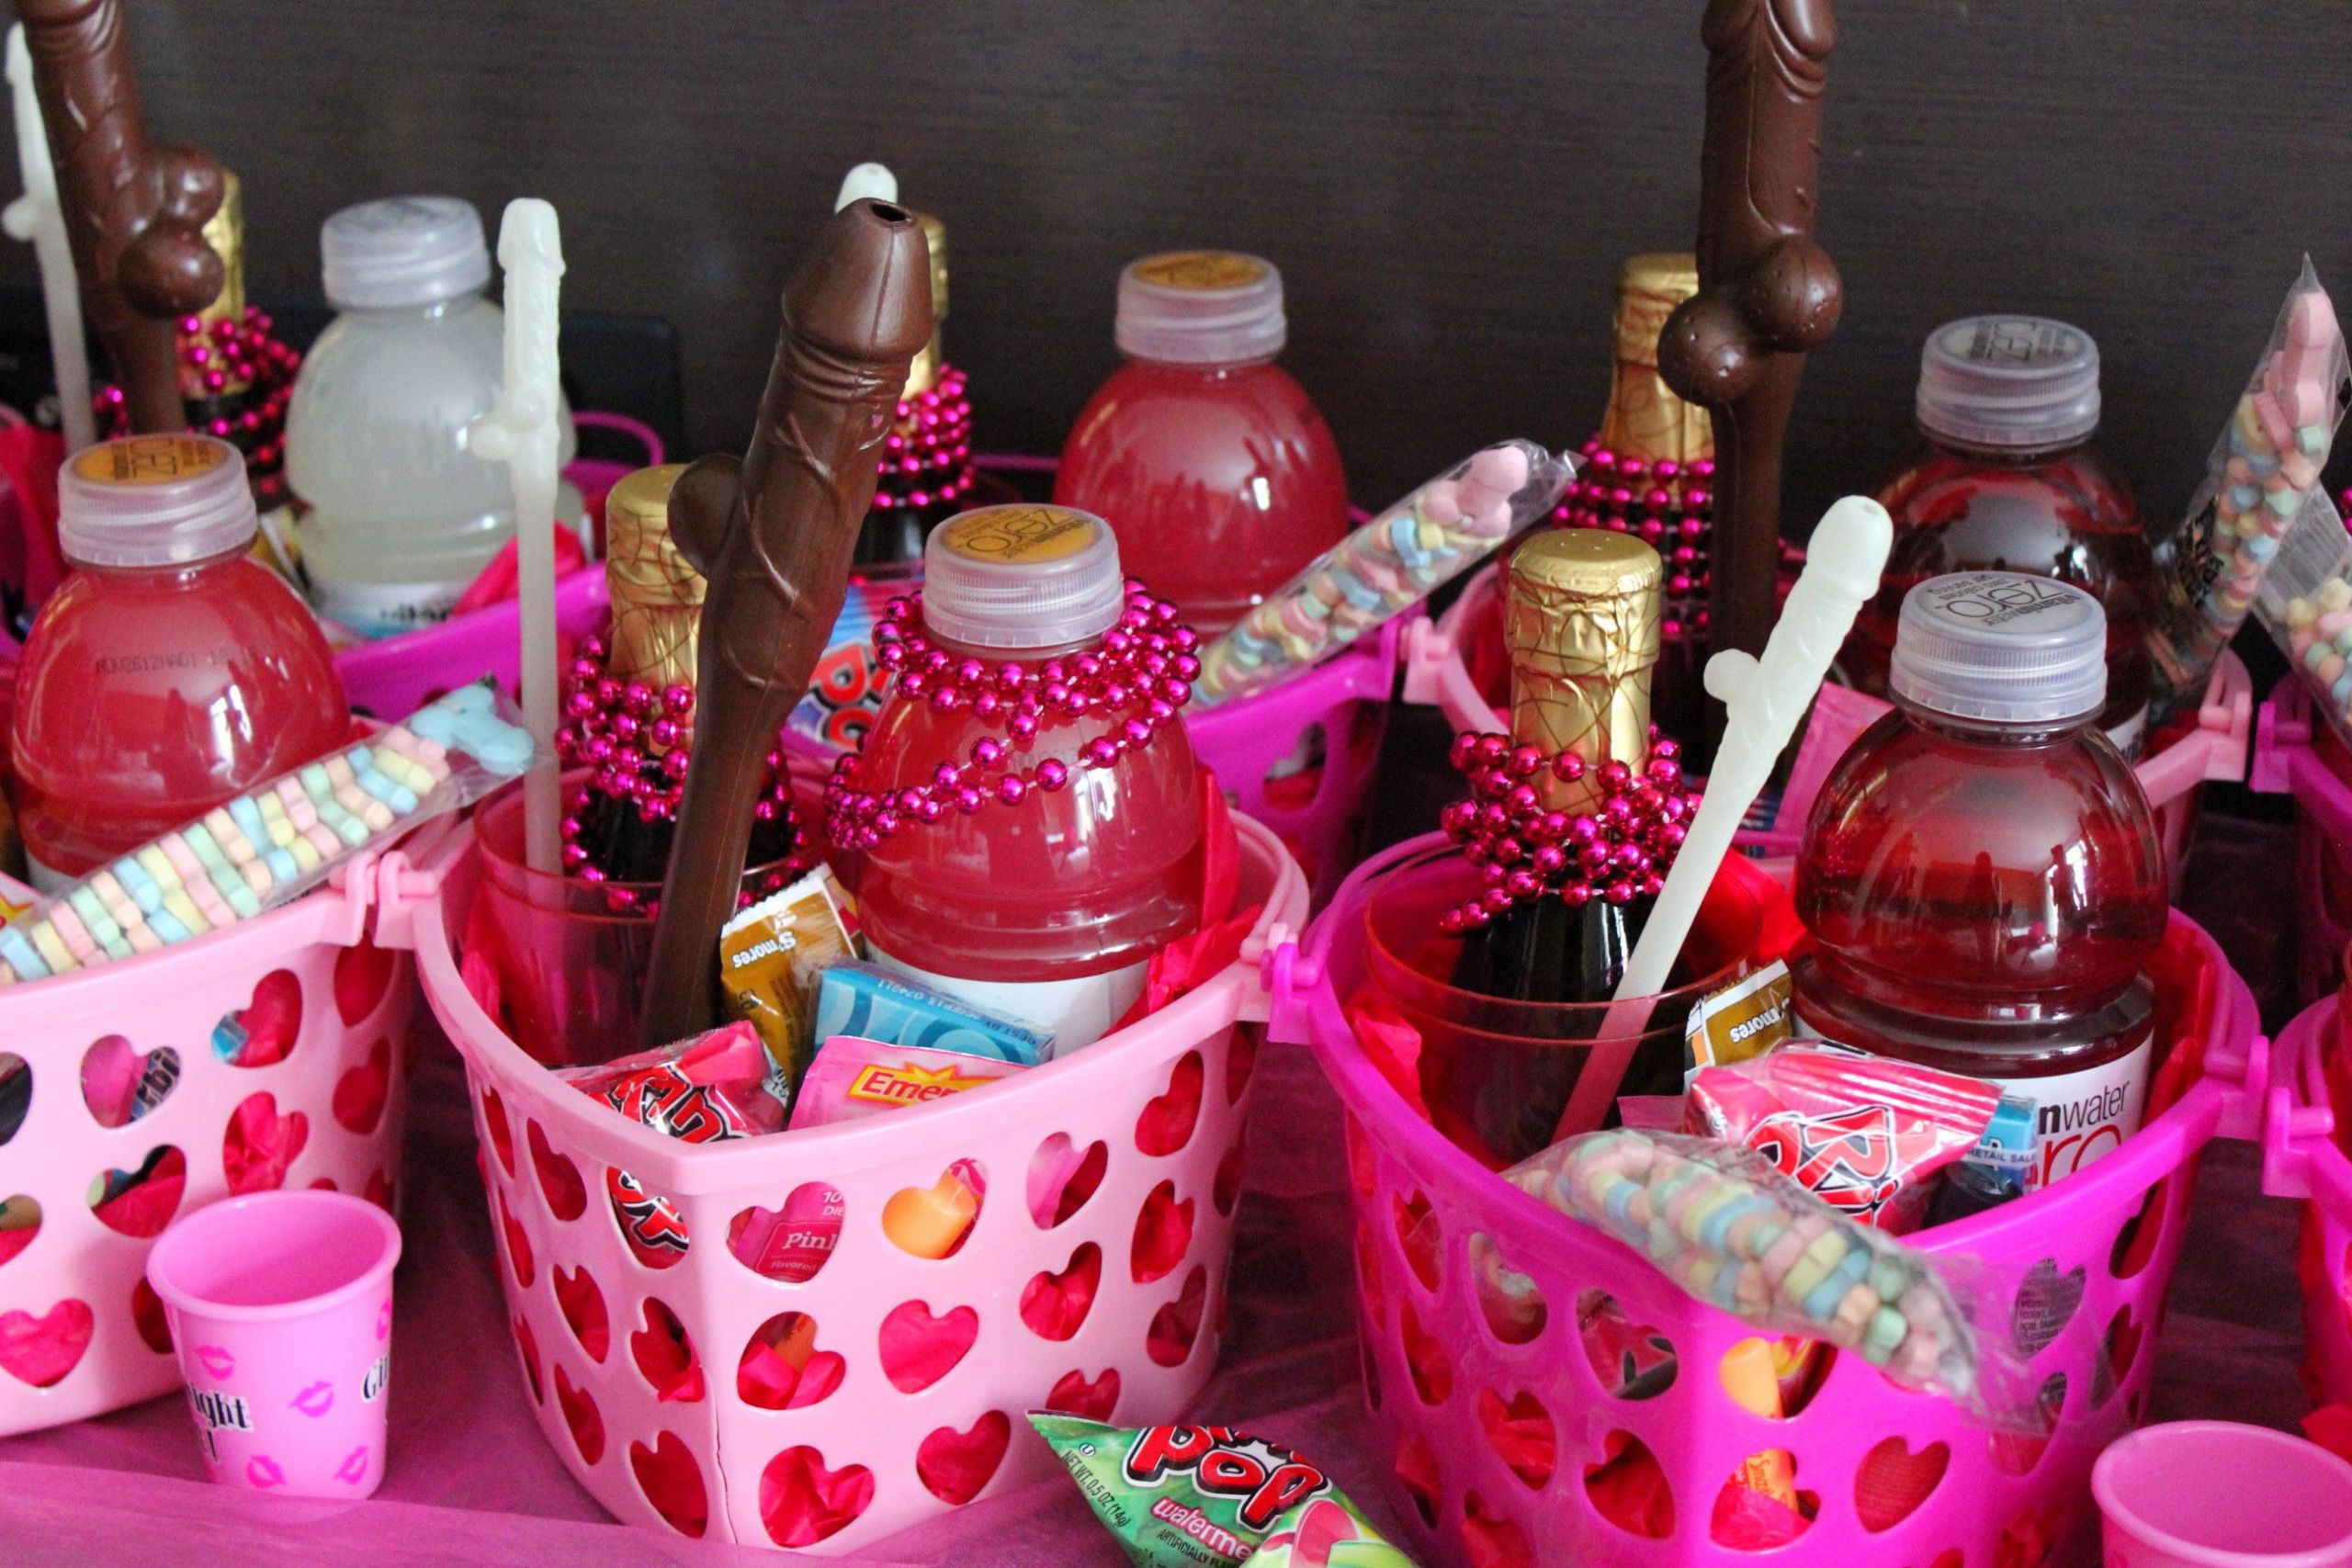 Ideas For Bachelorette Party Gifts For Bride
 Bachelorette Party Favors